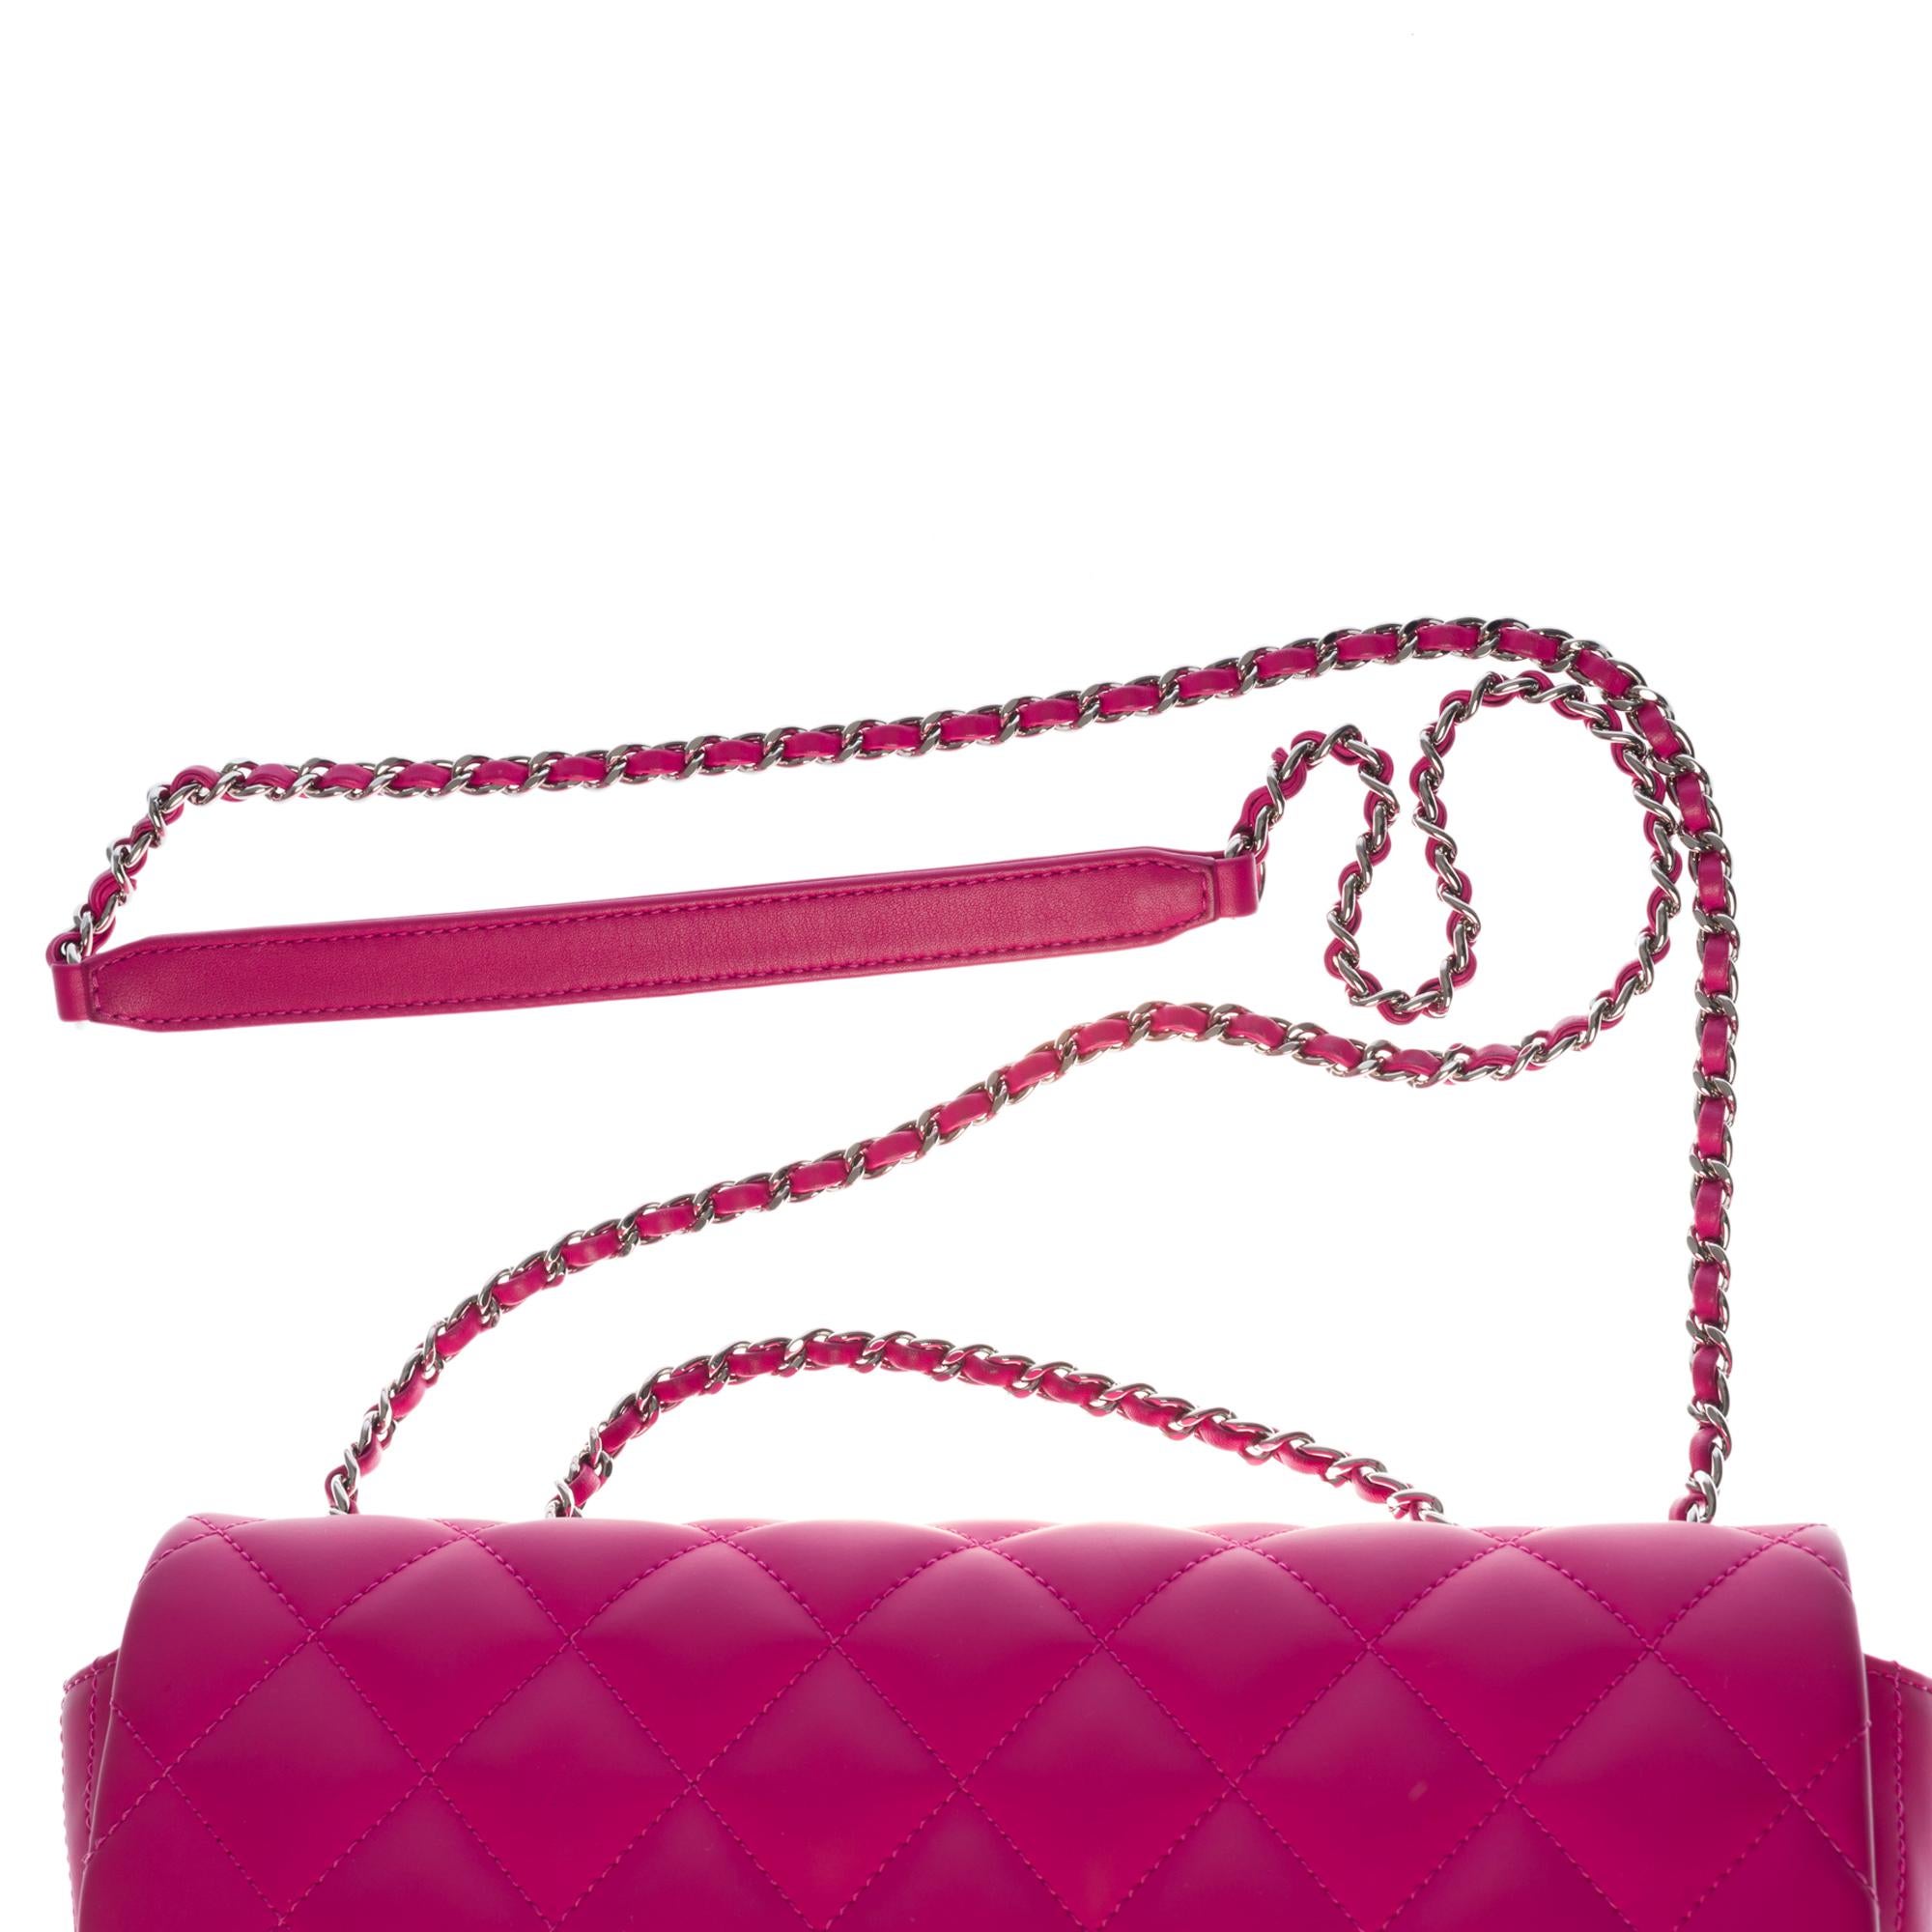 Women's Chanel Classic shoulder Flap bag in hot pink vegan leather and silver hardware